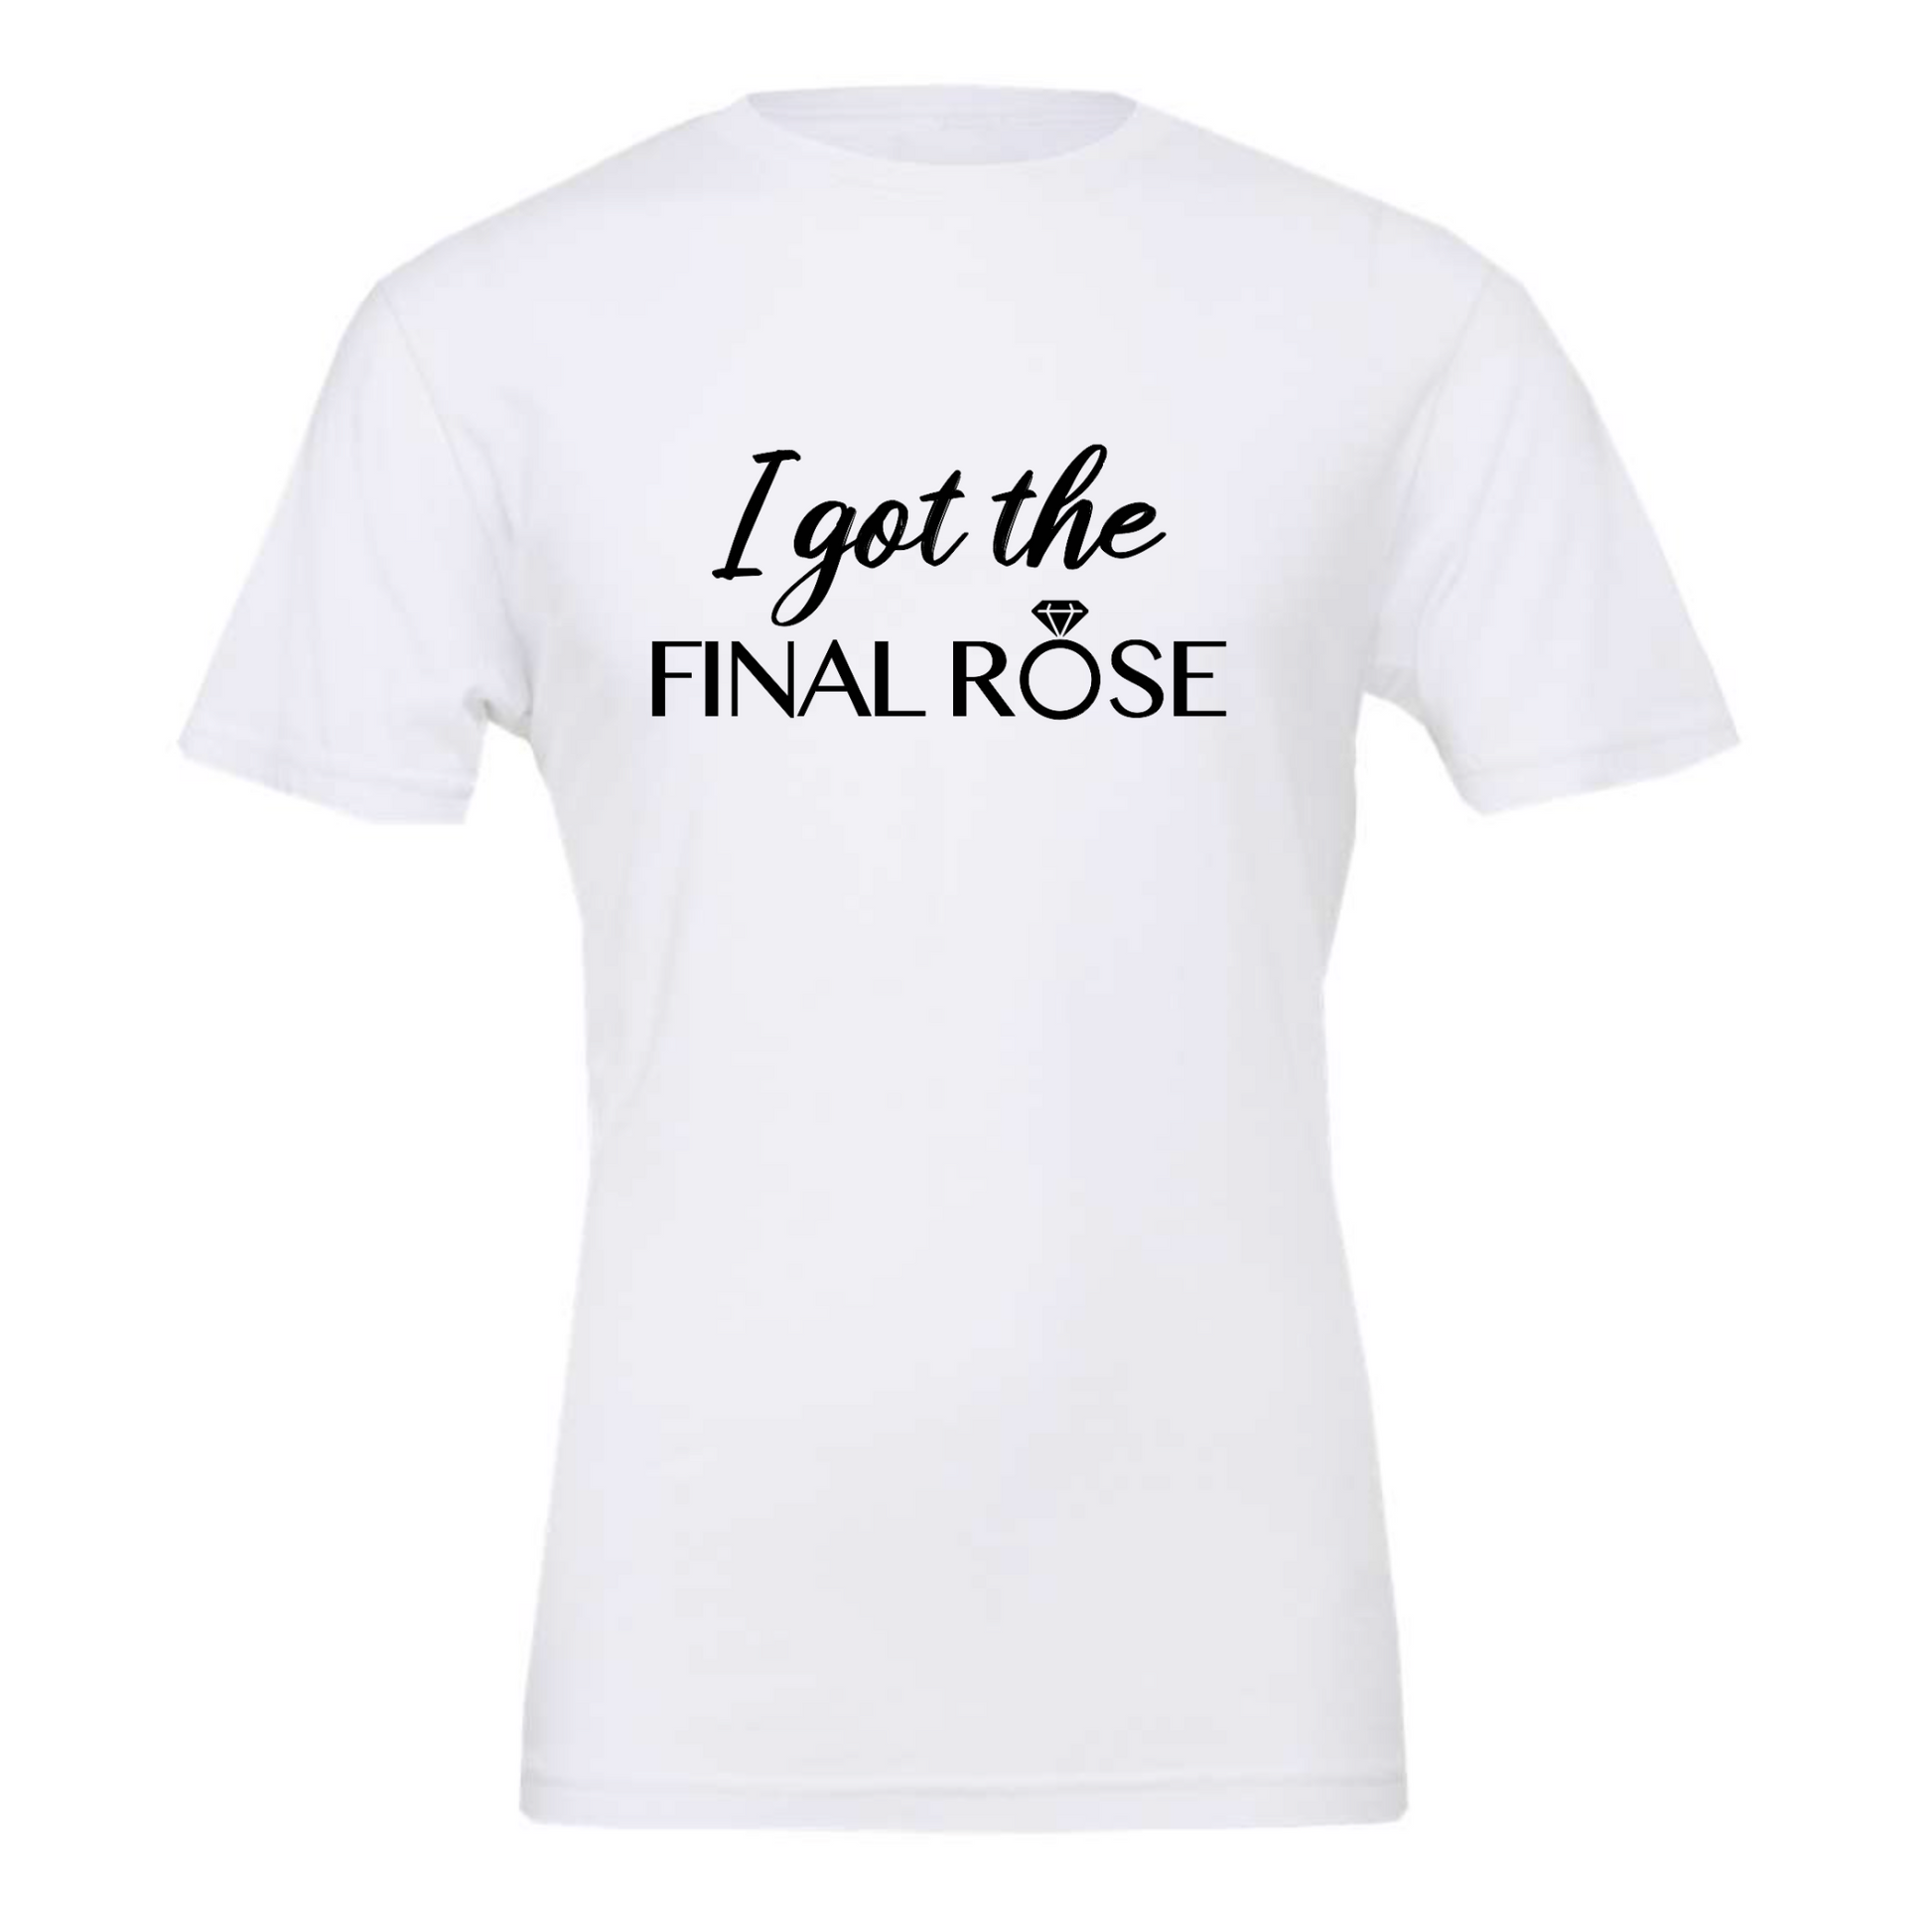 I Got The Final Rose Bride T-Shirt in white. The front has the saying "I got the final rose" with the O in rose being a diamond ring. The "I got the" is in a script font with the "final rose" is in a bold font. Design is in black. This is the front view of the shirt.